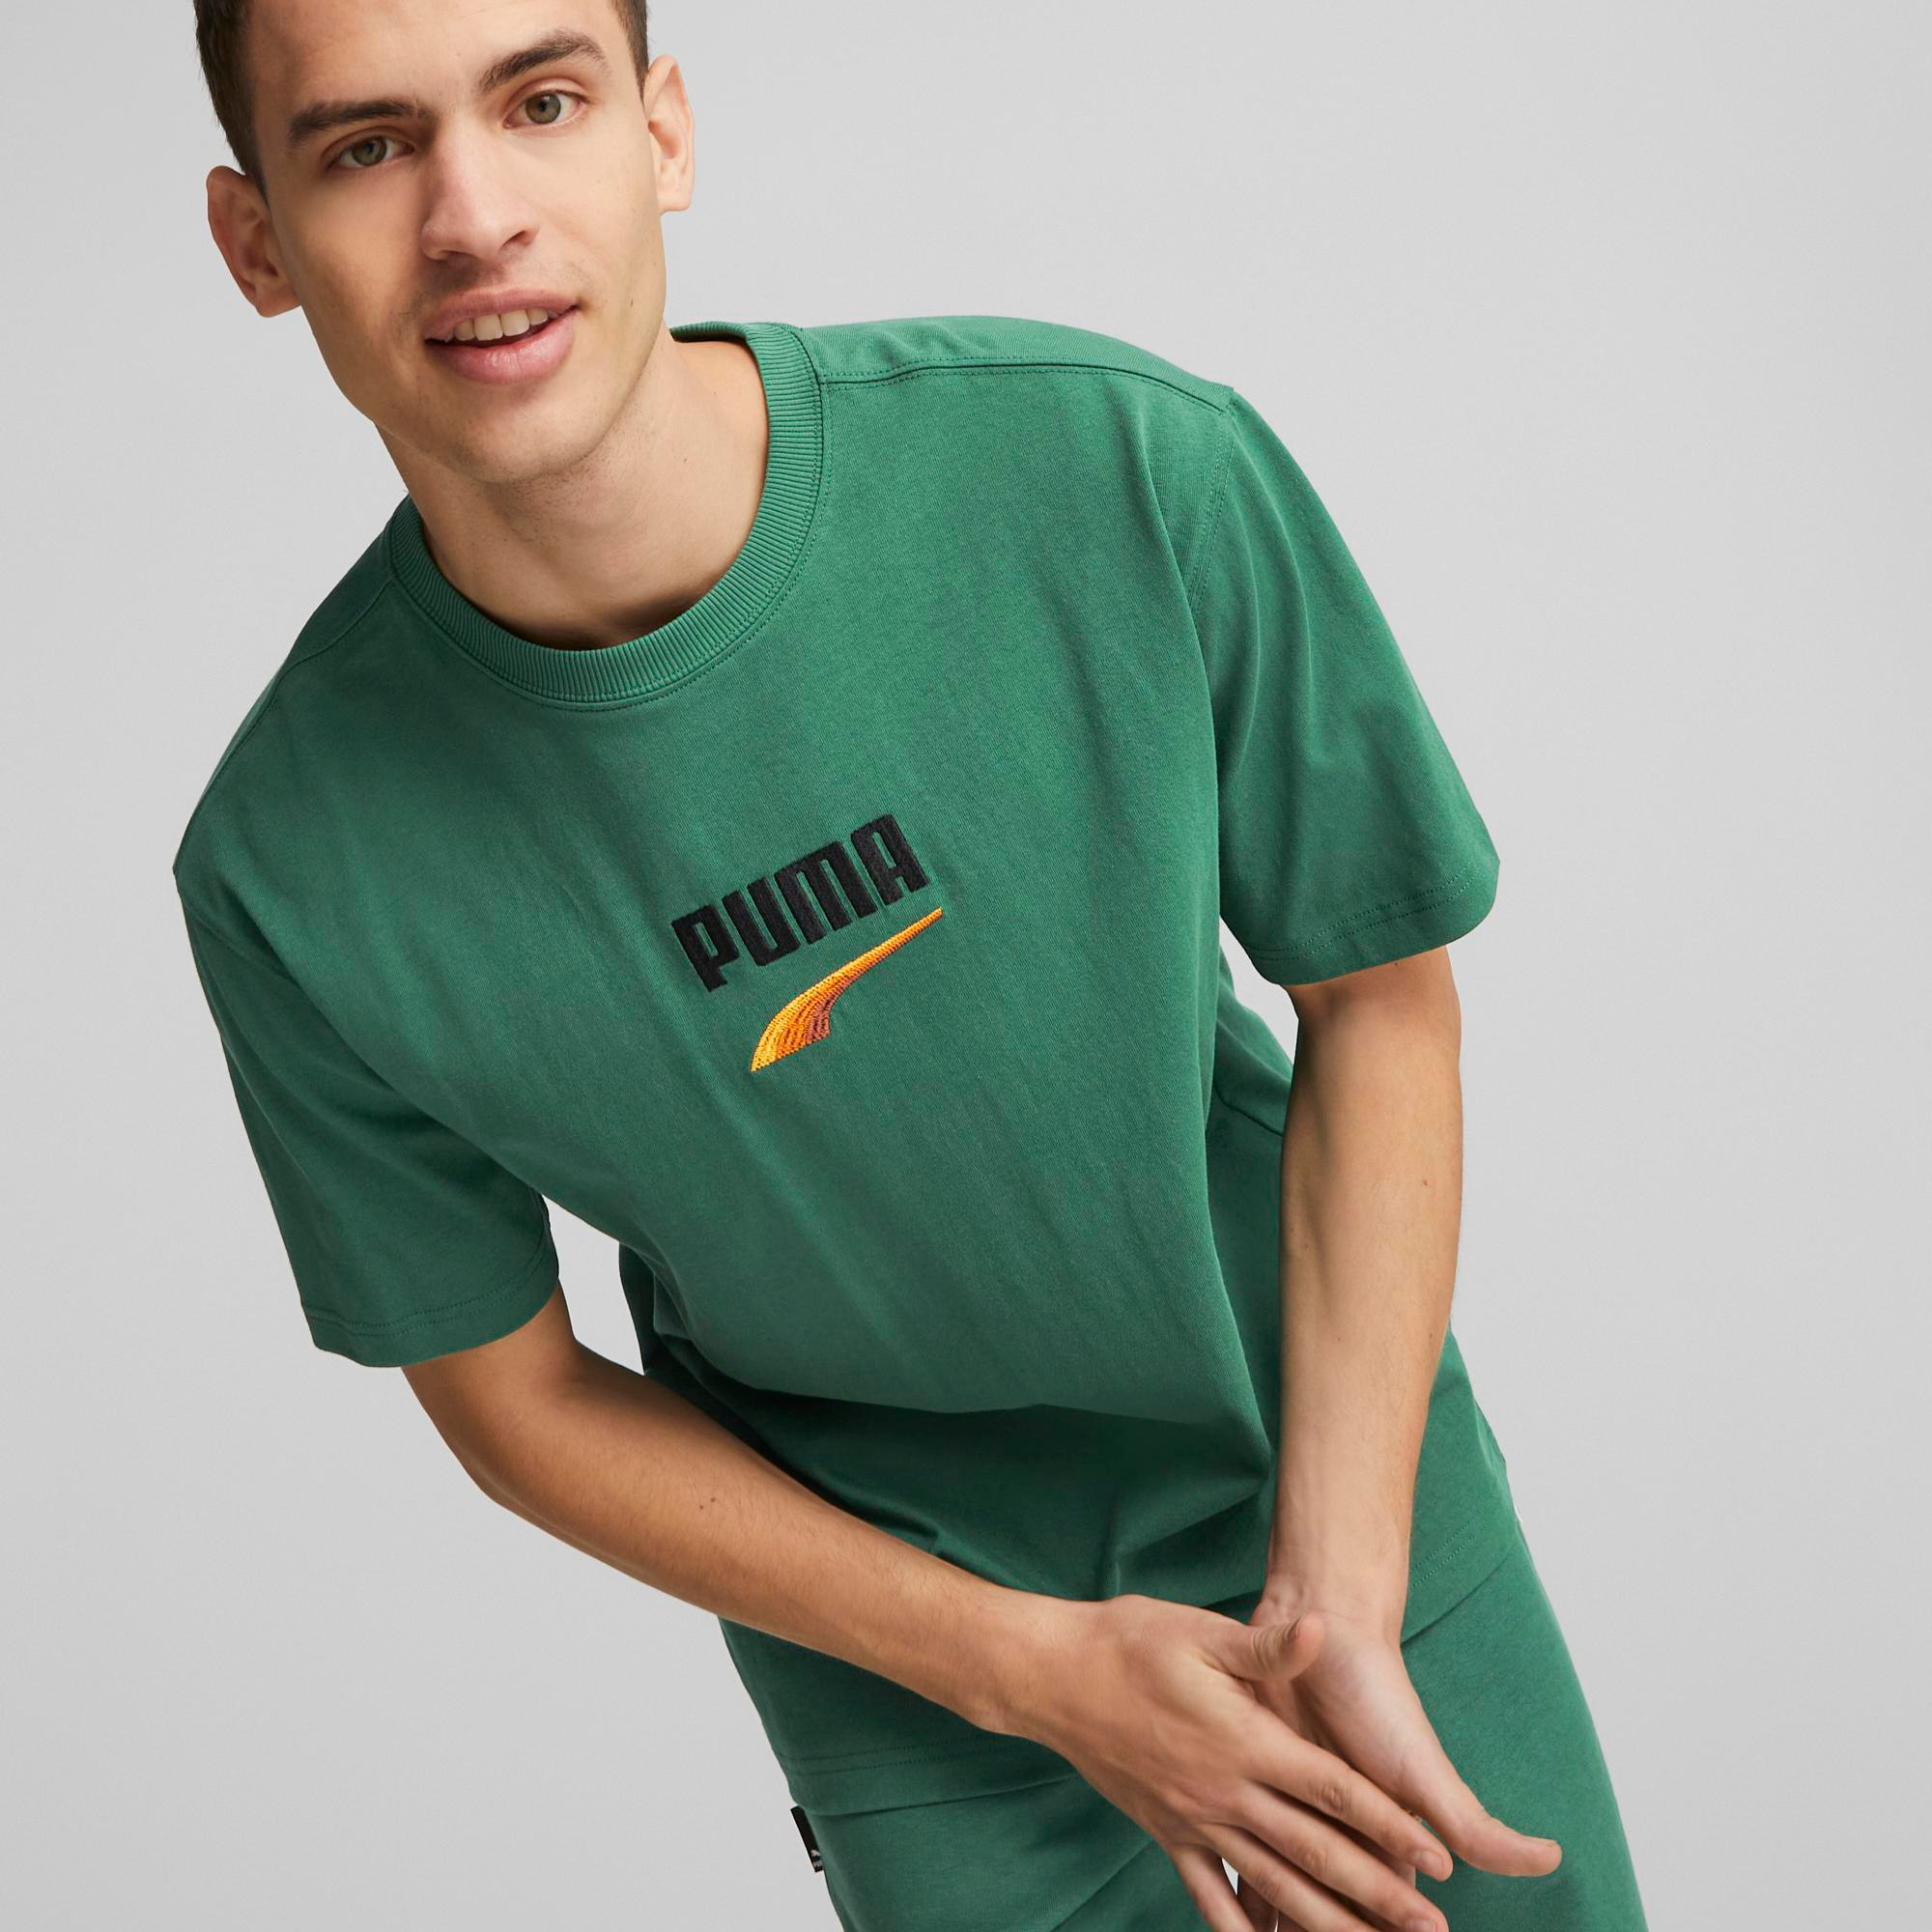 Puma - Cotton T-shirt with logo, Green, large image number 2